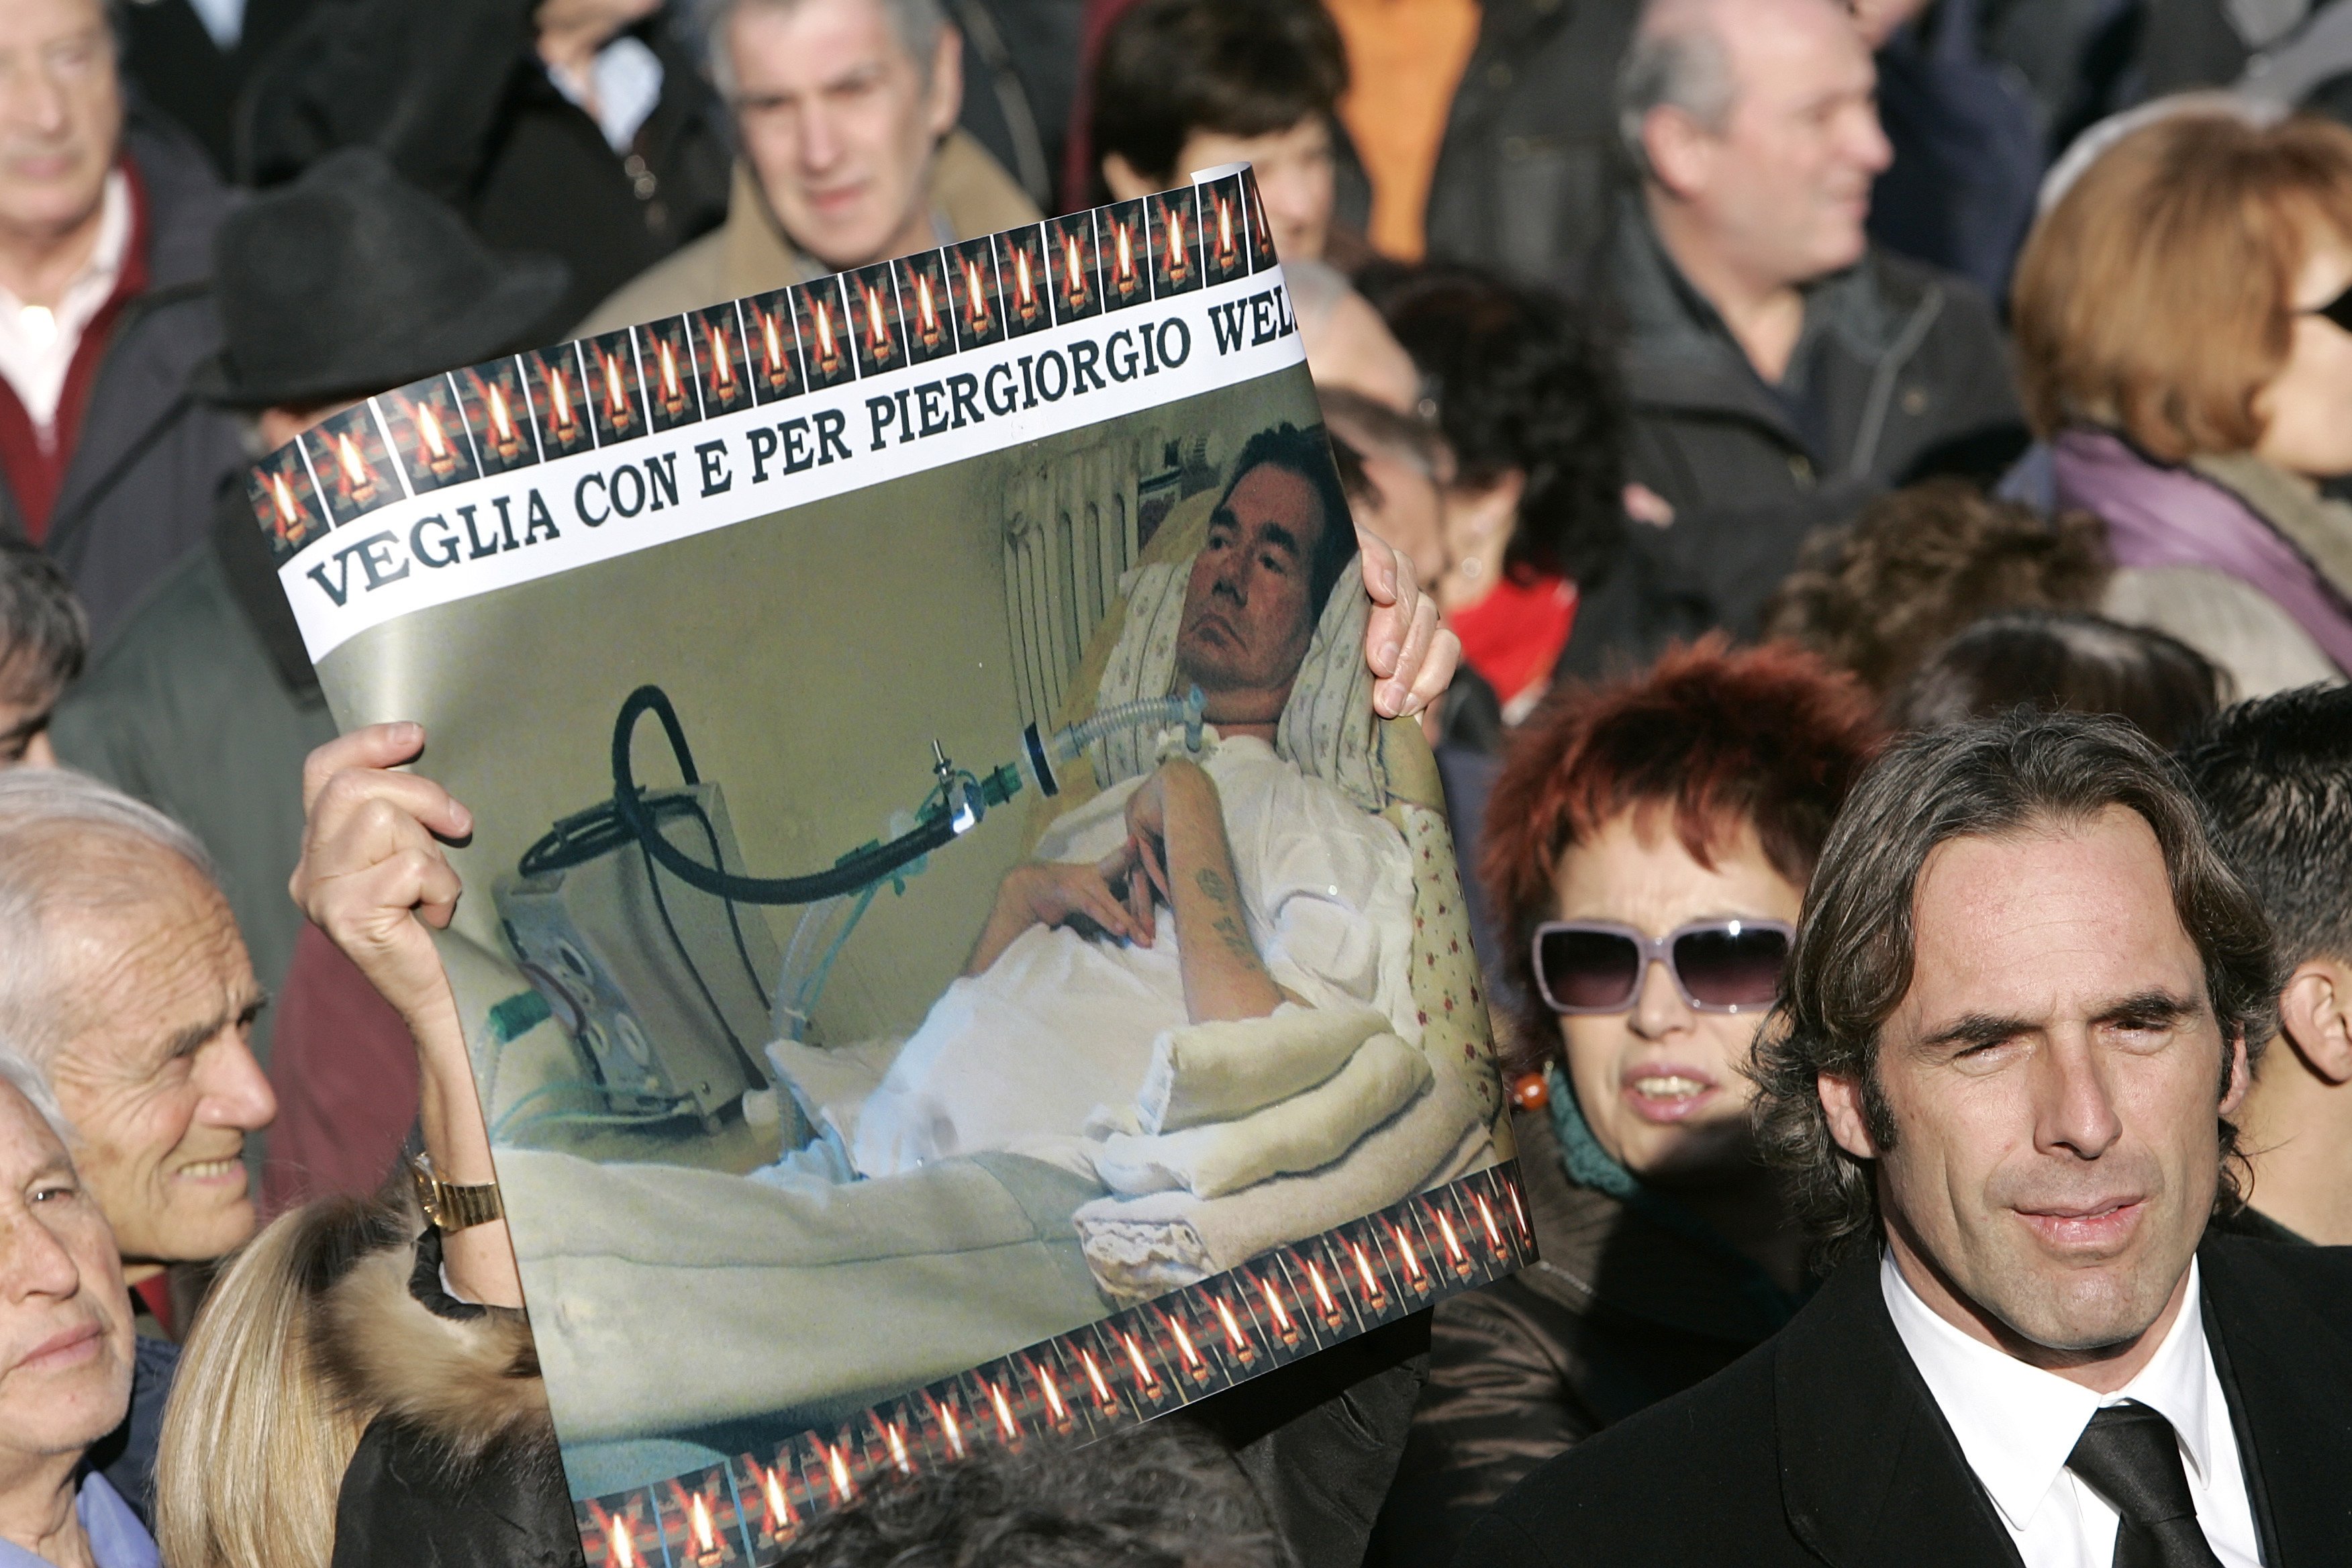 Mourners hold a picture of Piergiorgio Welby during his funeral in Rome in this Dec. 24, 2006. (CNS photo/Max Rossi)